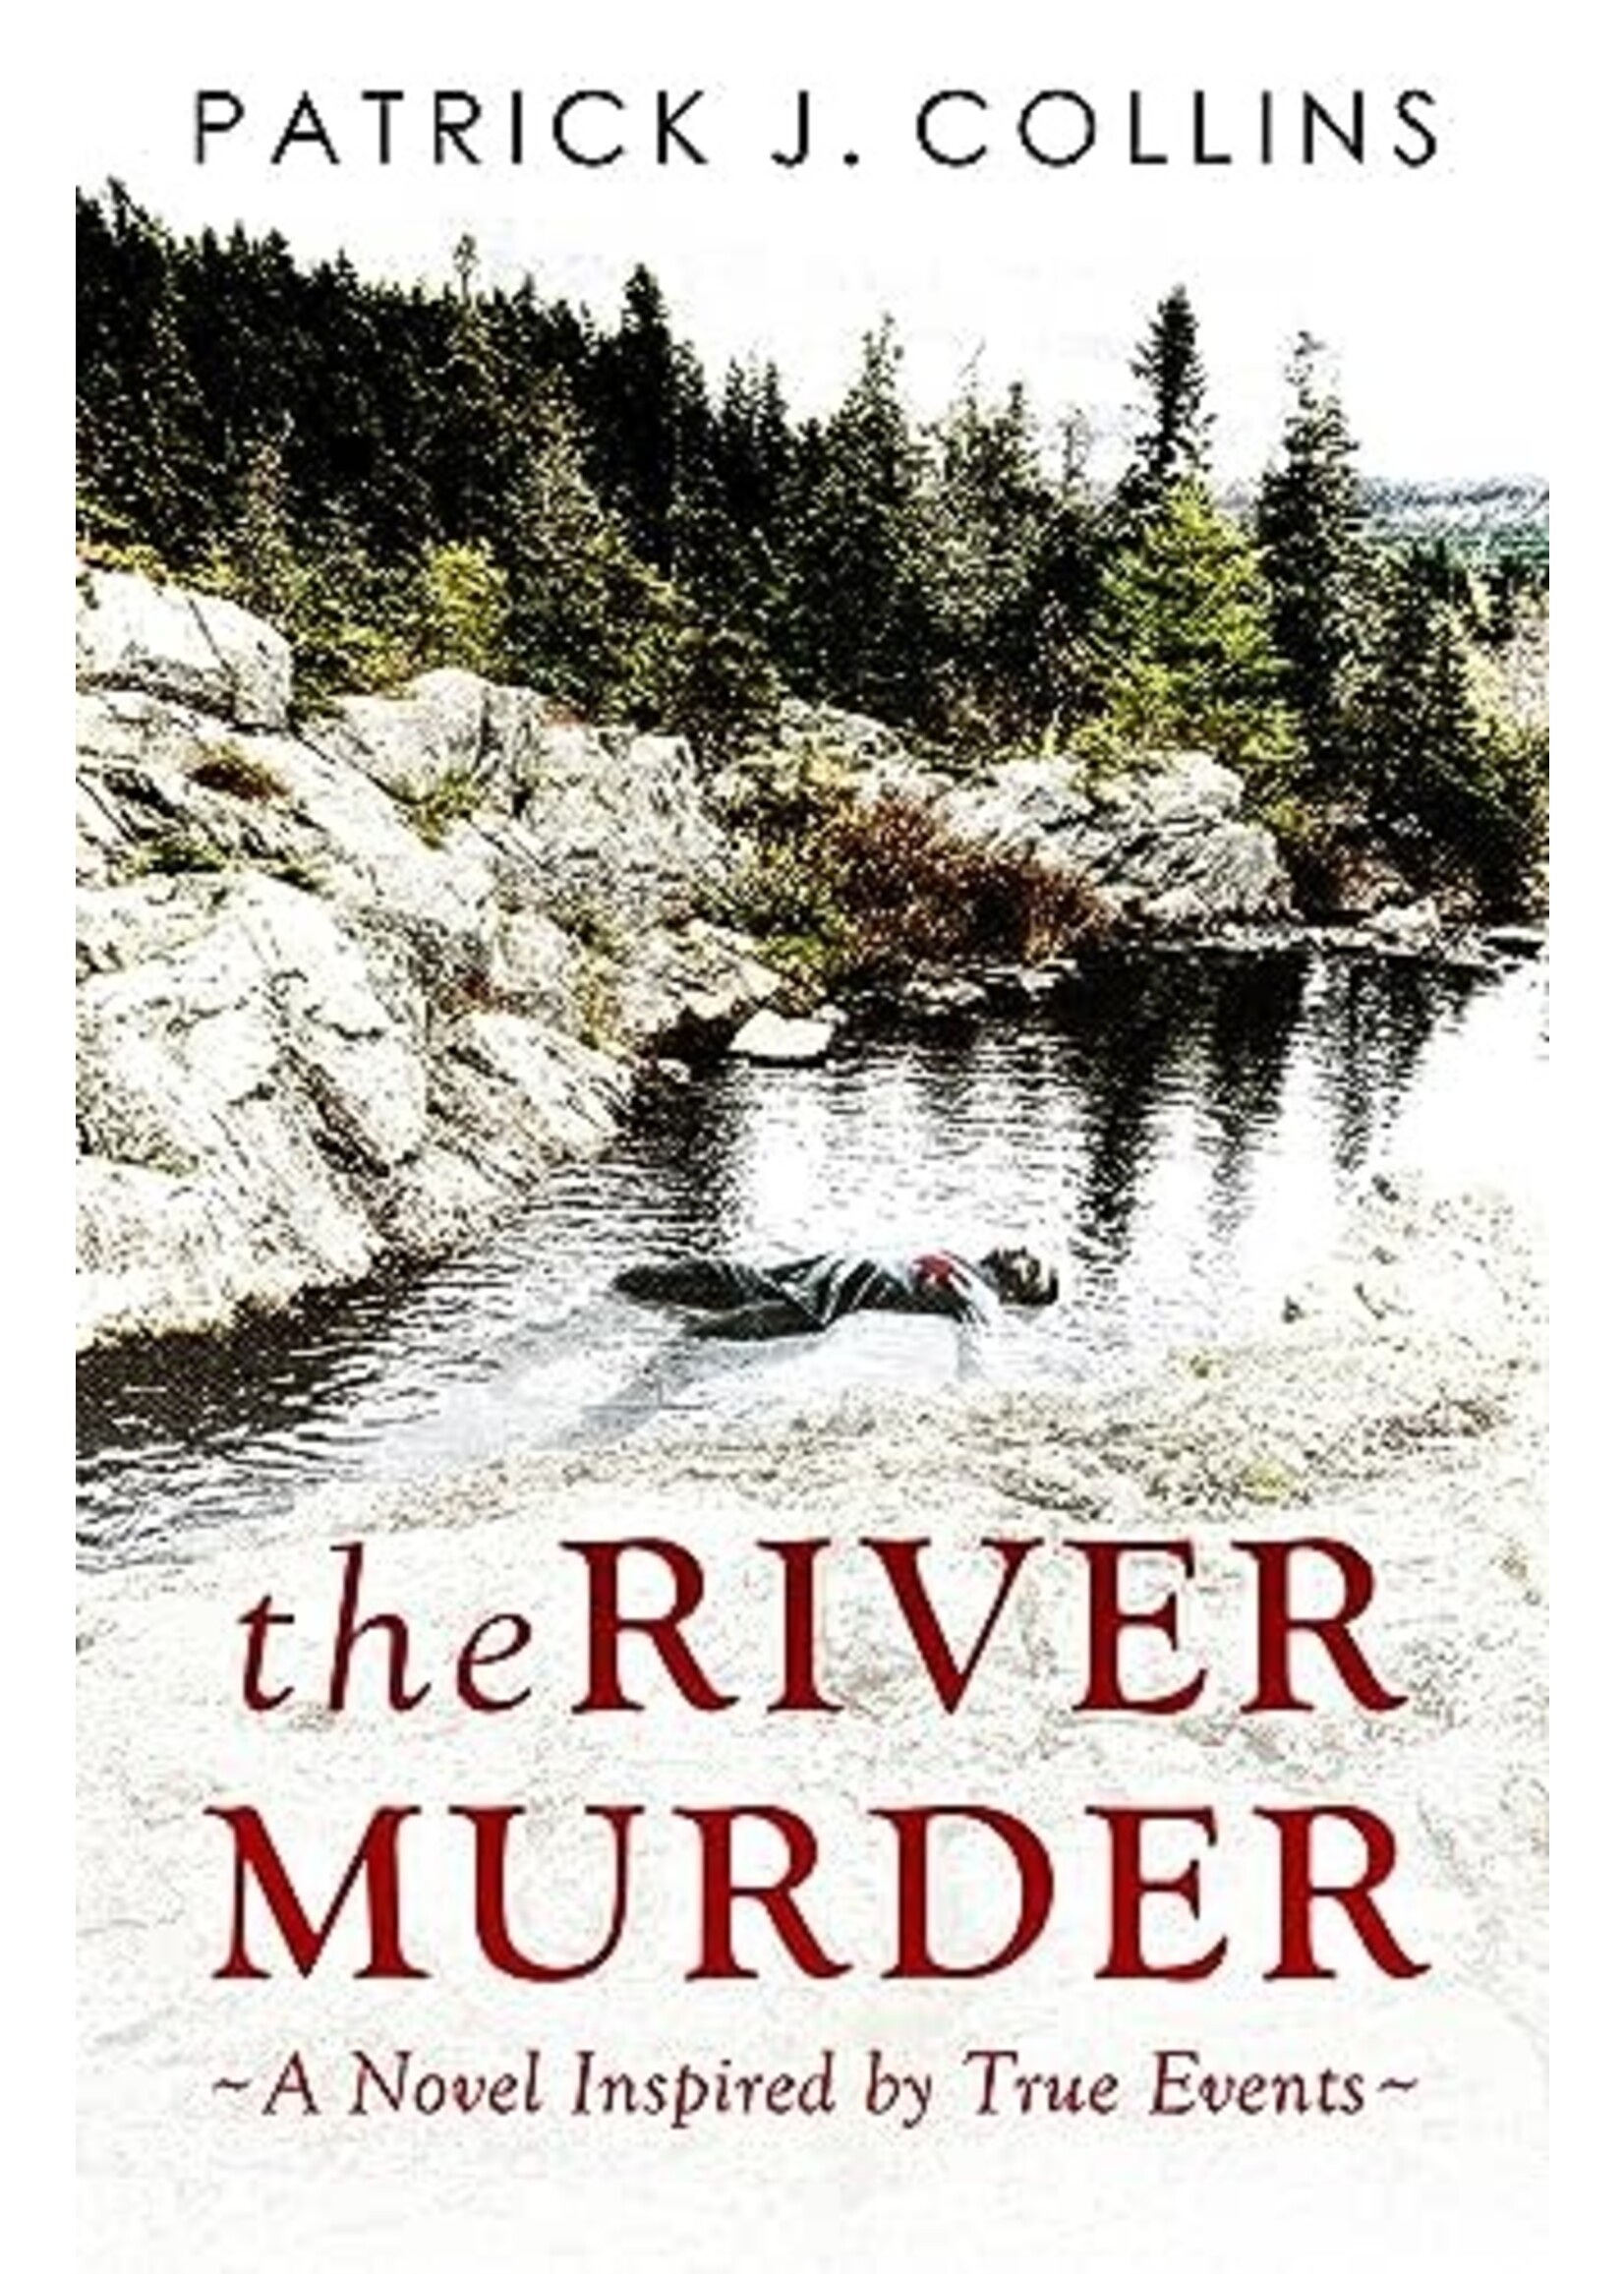 The River Murder by Patrick J. Collins